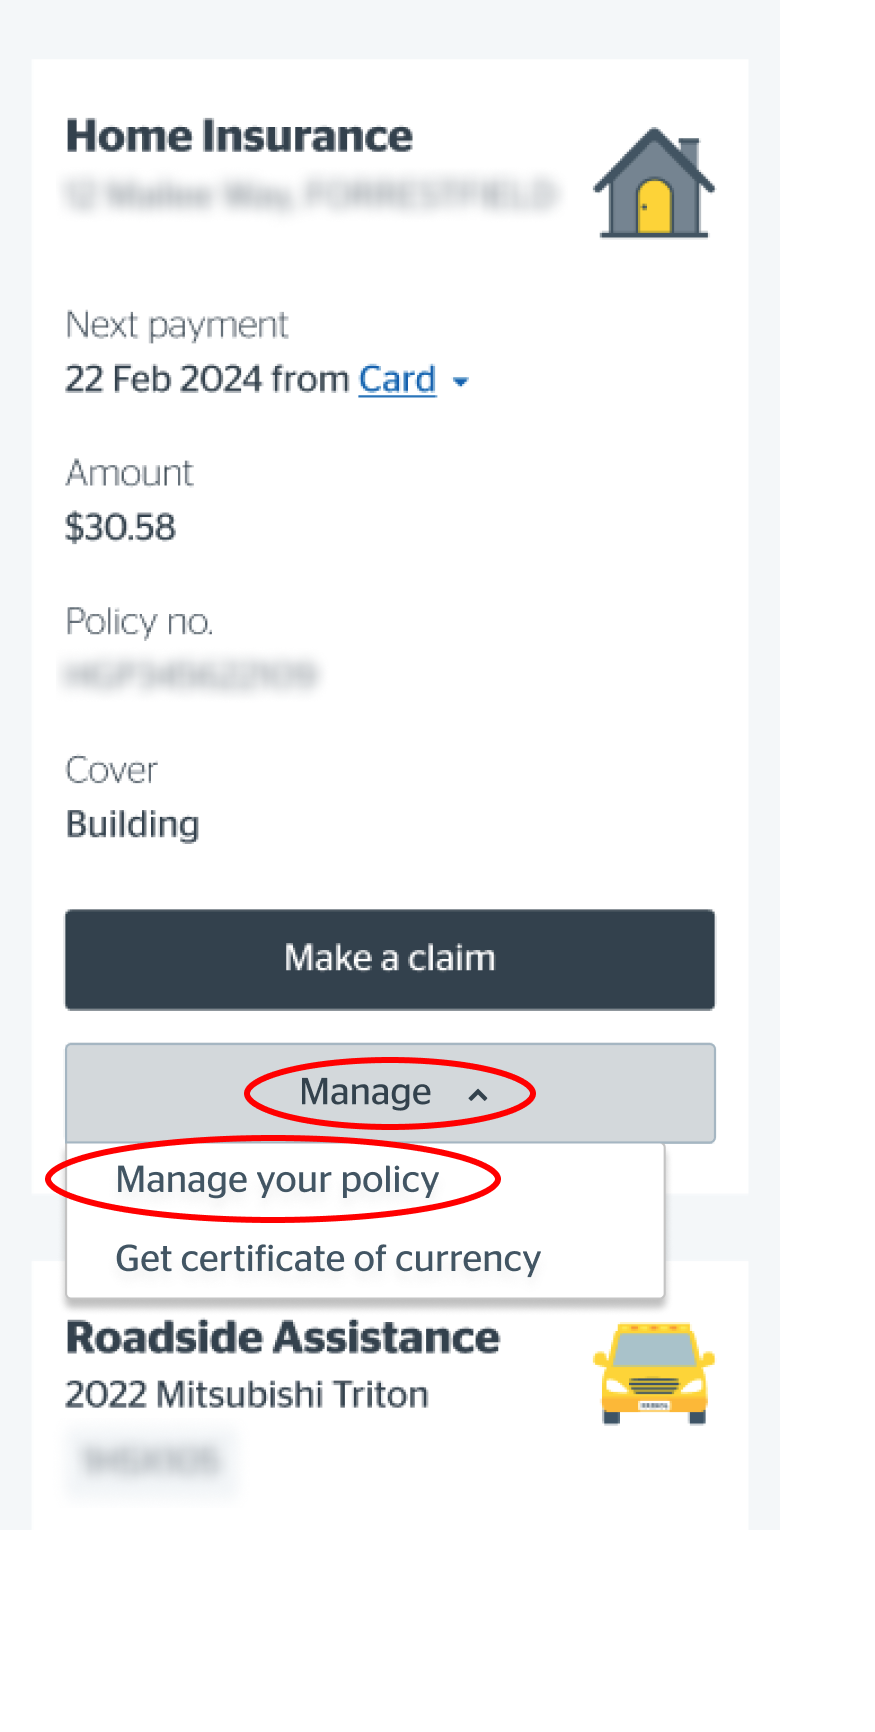 Selecting Manage my policy from dropdown on mobile